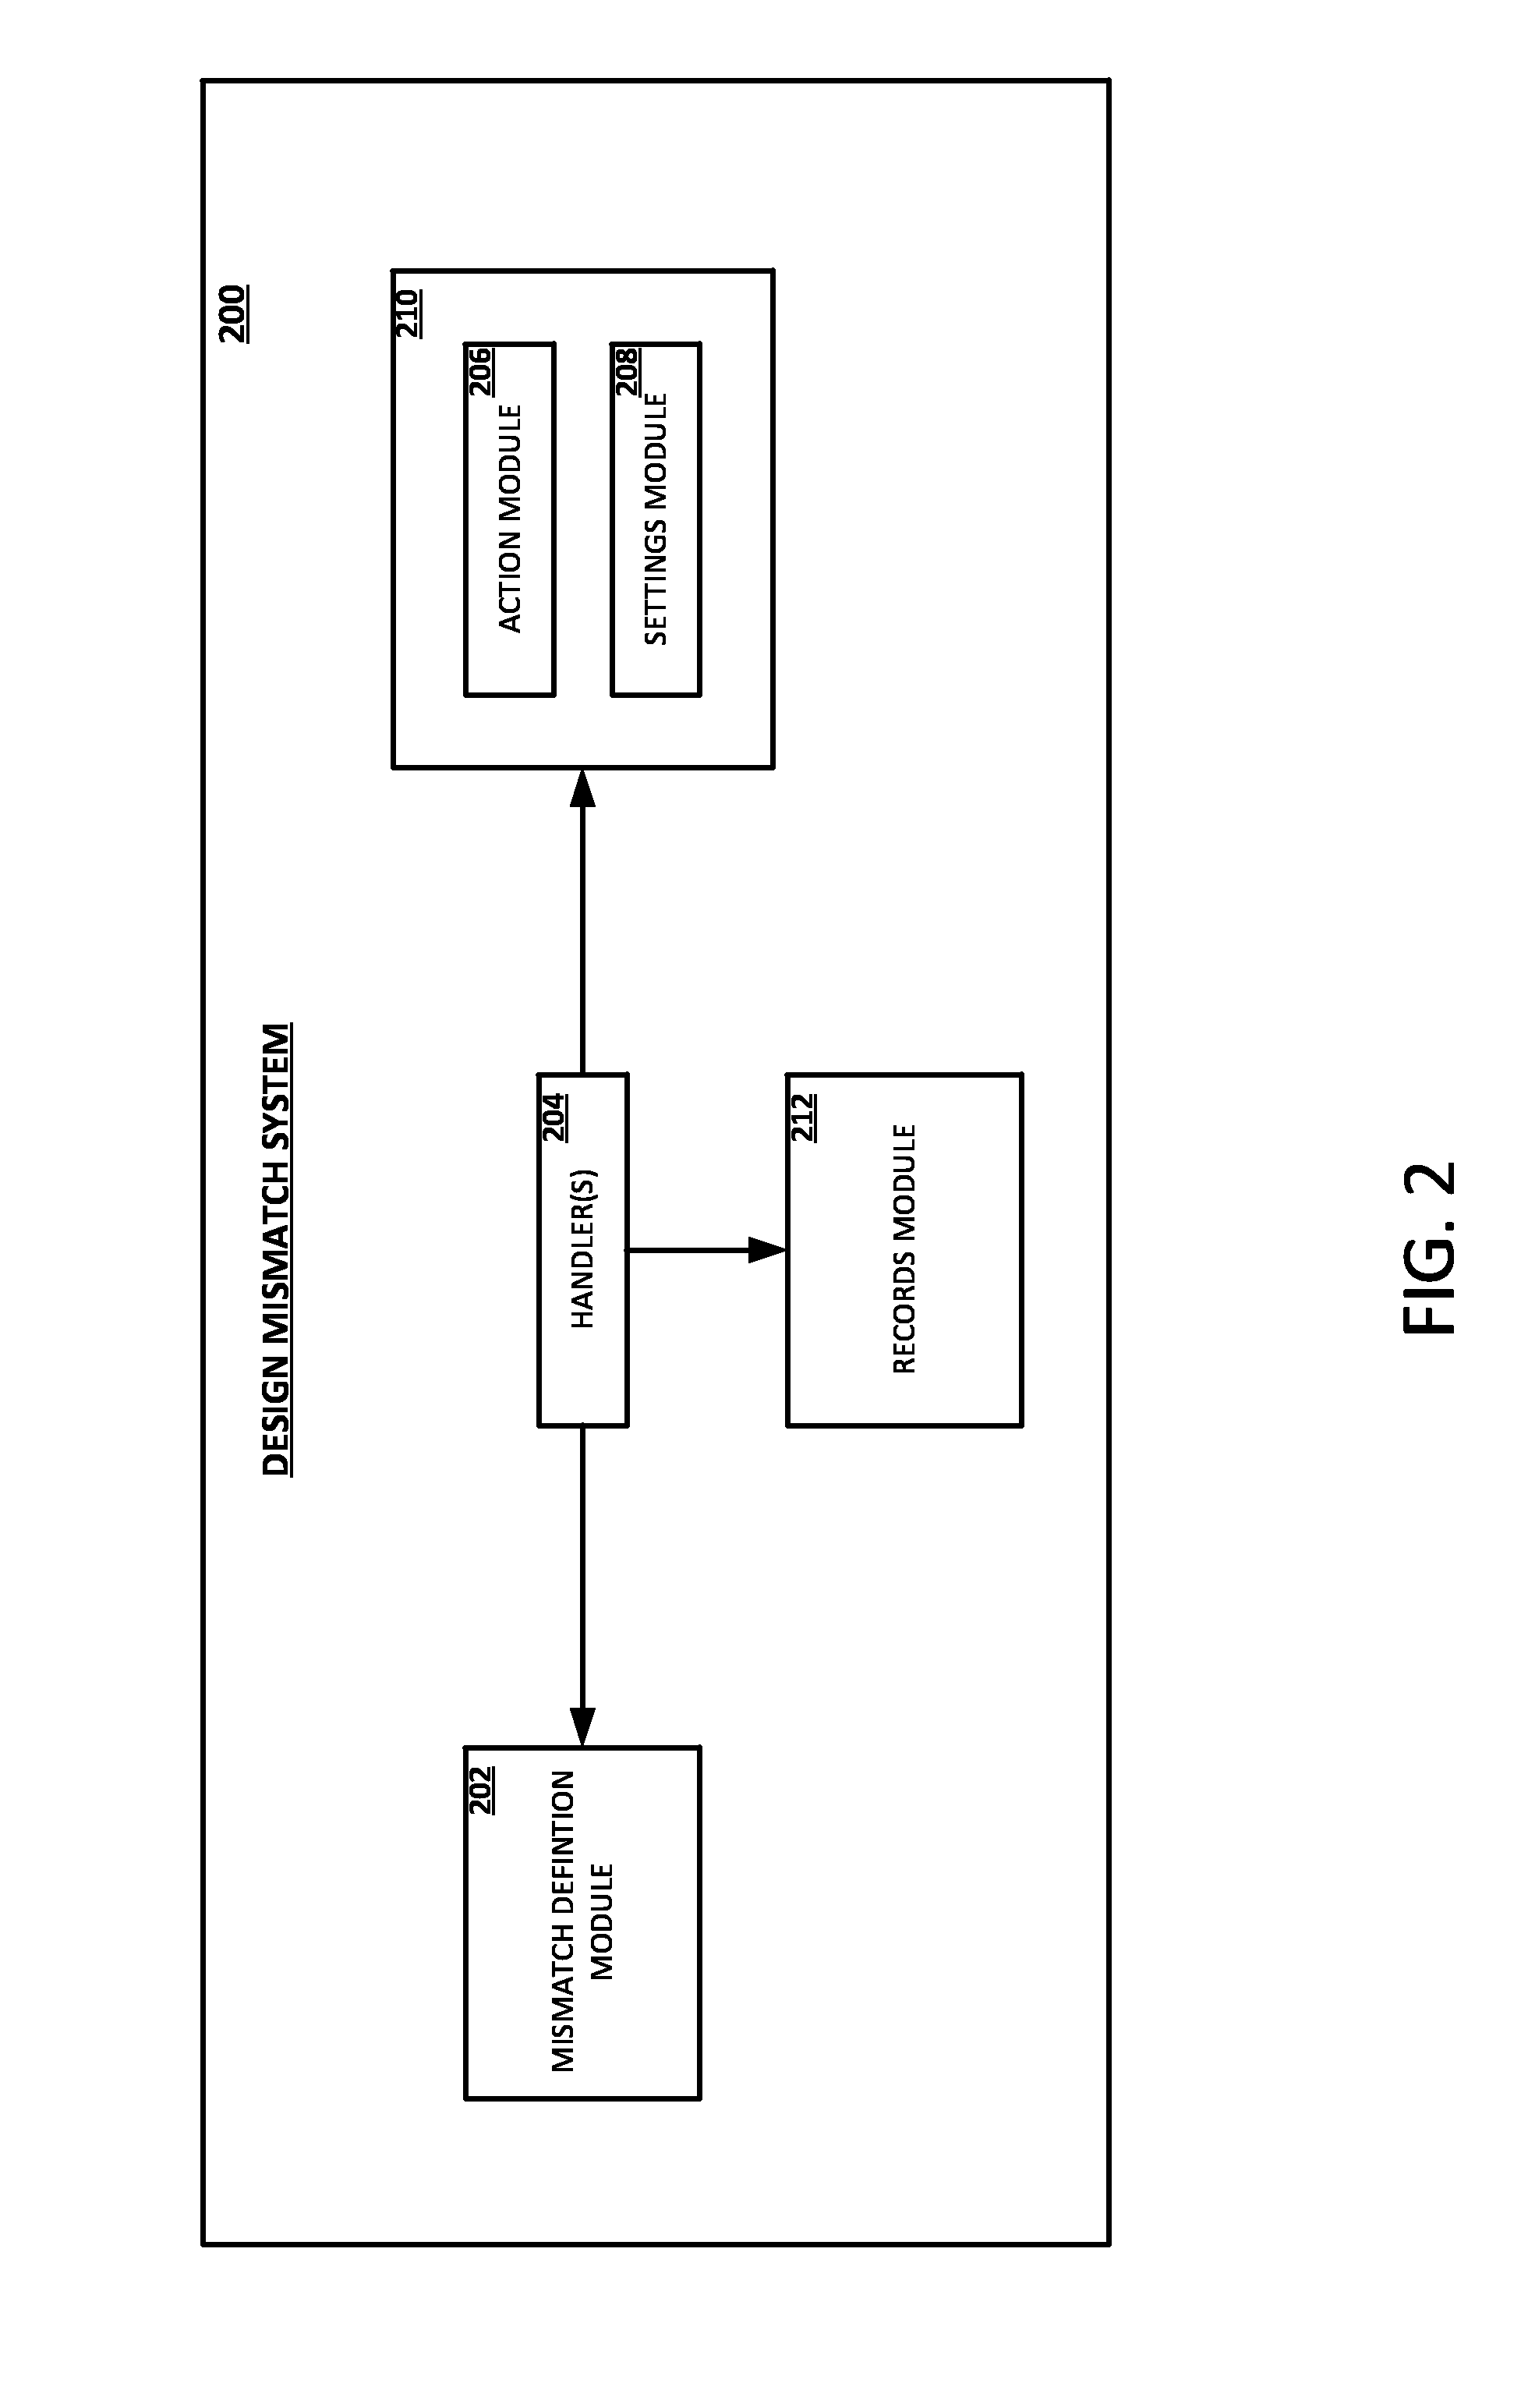 Method for organizing, controlling, and reporting on design mismatch information in IC physical design data